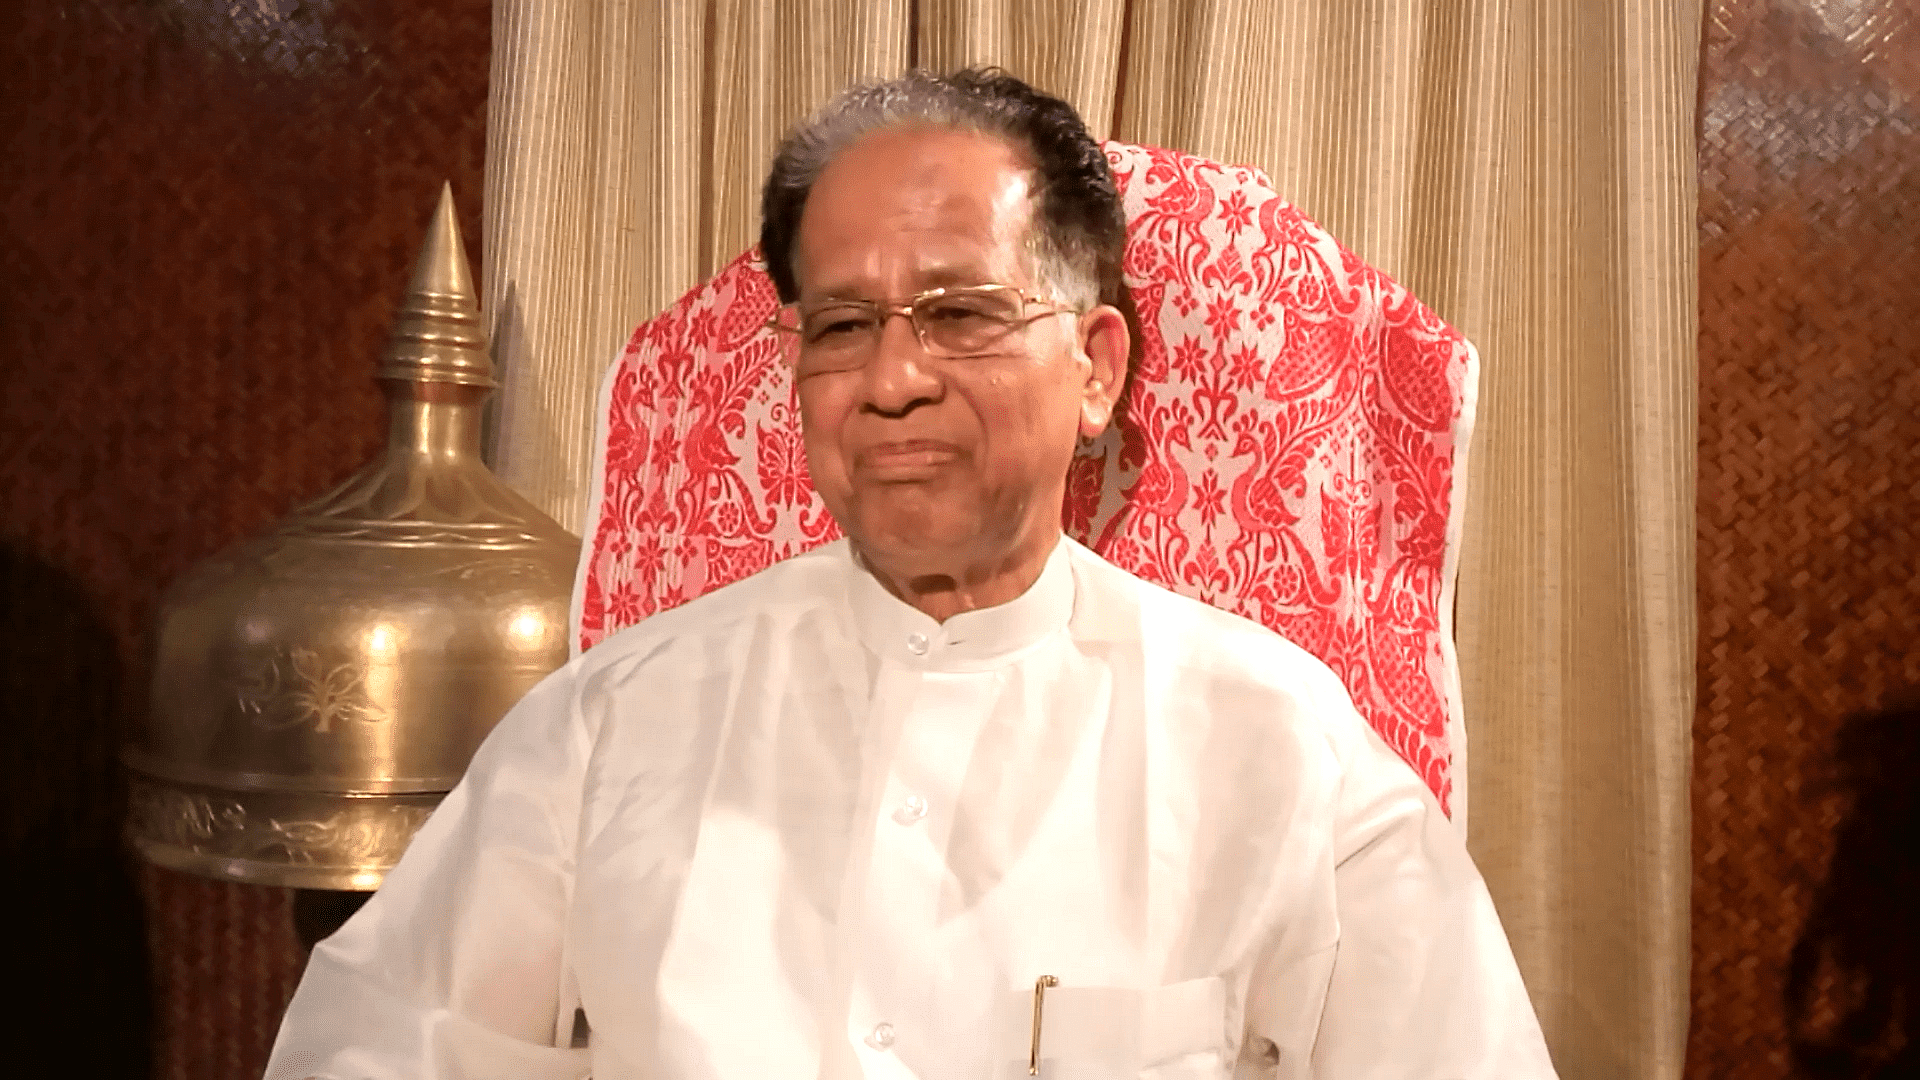 Following post-COVID-19 complications, Tarun Gogoi was put on ventilation since his admission at the Gauhati Medical College and Hospital (GMCH) on 2 November.